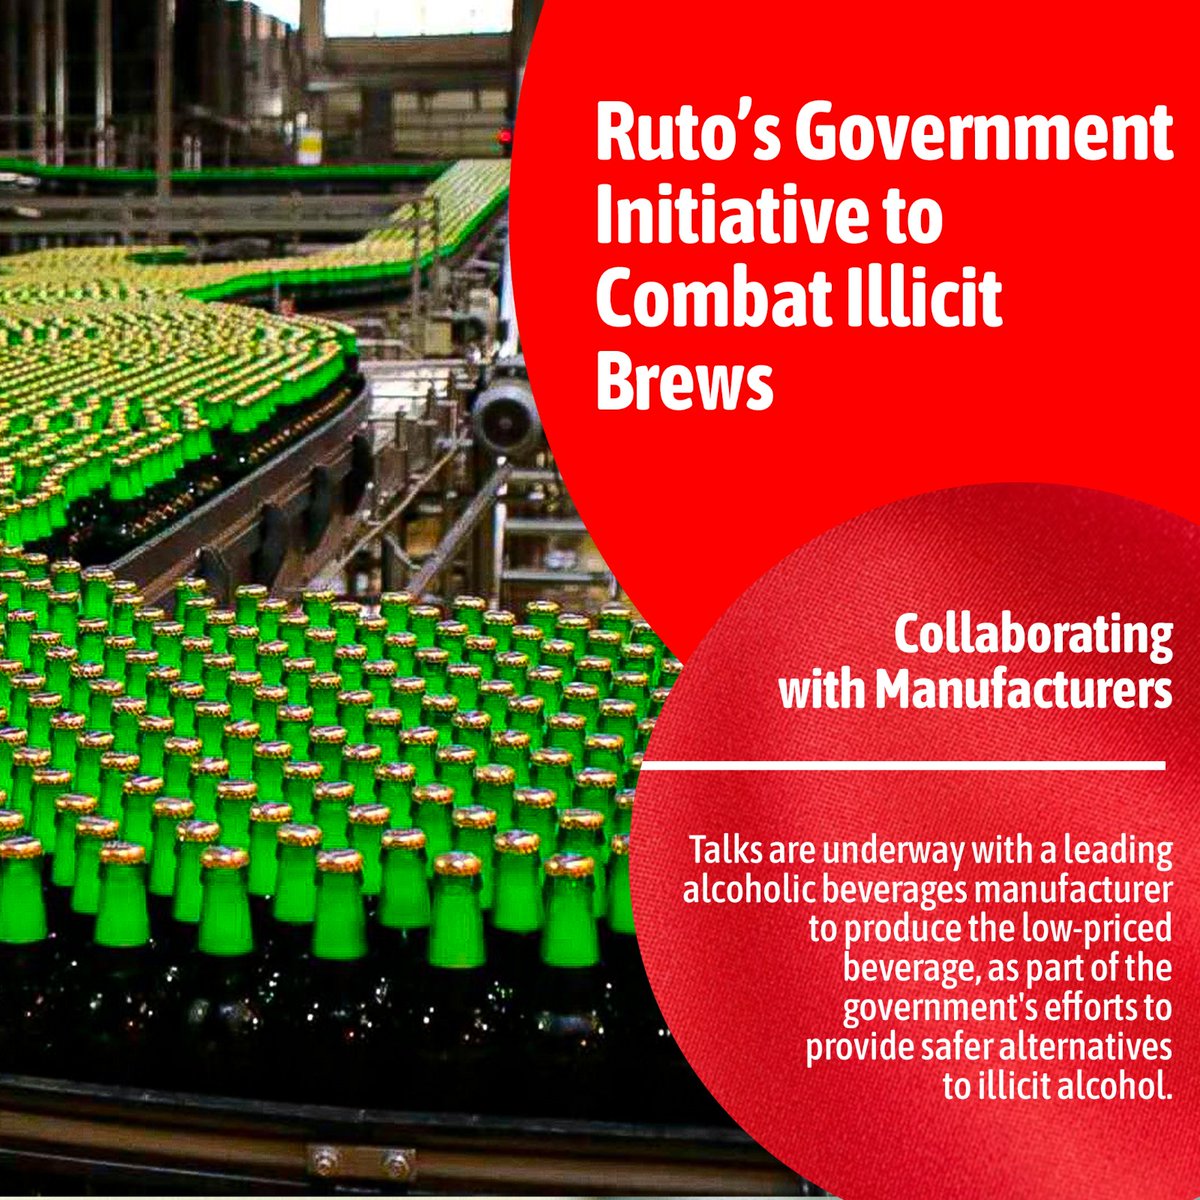 Deputy President Gachagua announces plans to reintroduce low-priced, healthy alcoholic drinks to combat illicit brews. Safer choices for all! Stop Illicit Brew #GachaguaVsIllicitBrews #RigathiOnAssignment